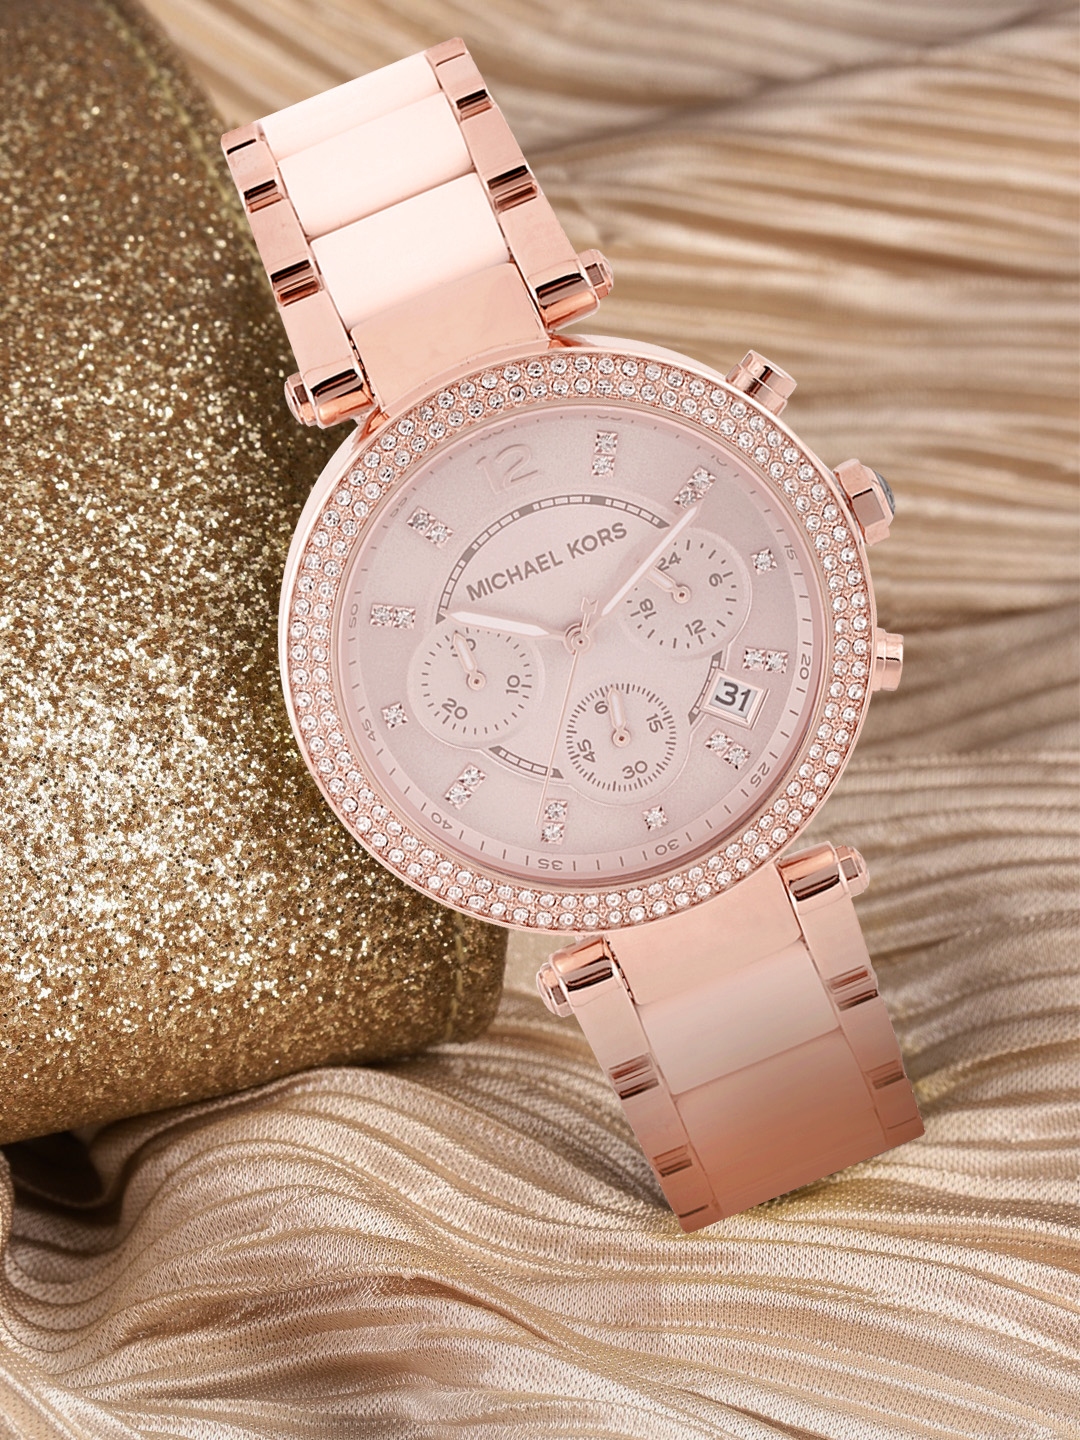 Party Wear Round Michael Kors Watch For Women For Personal Use